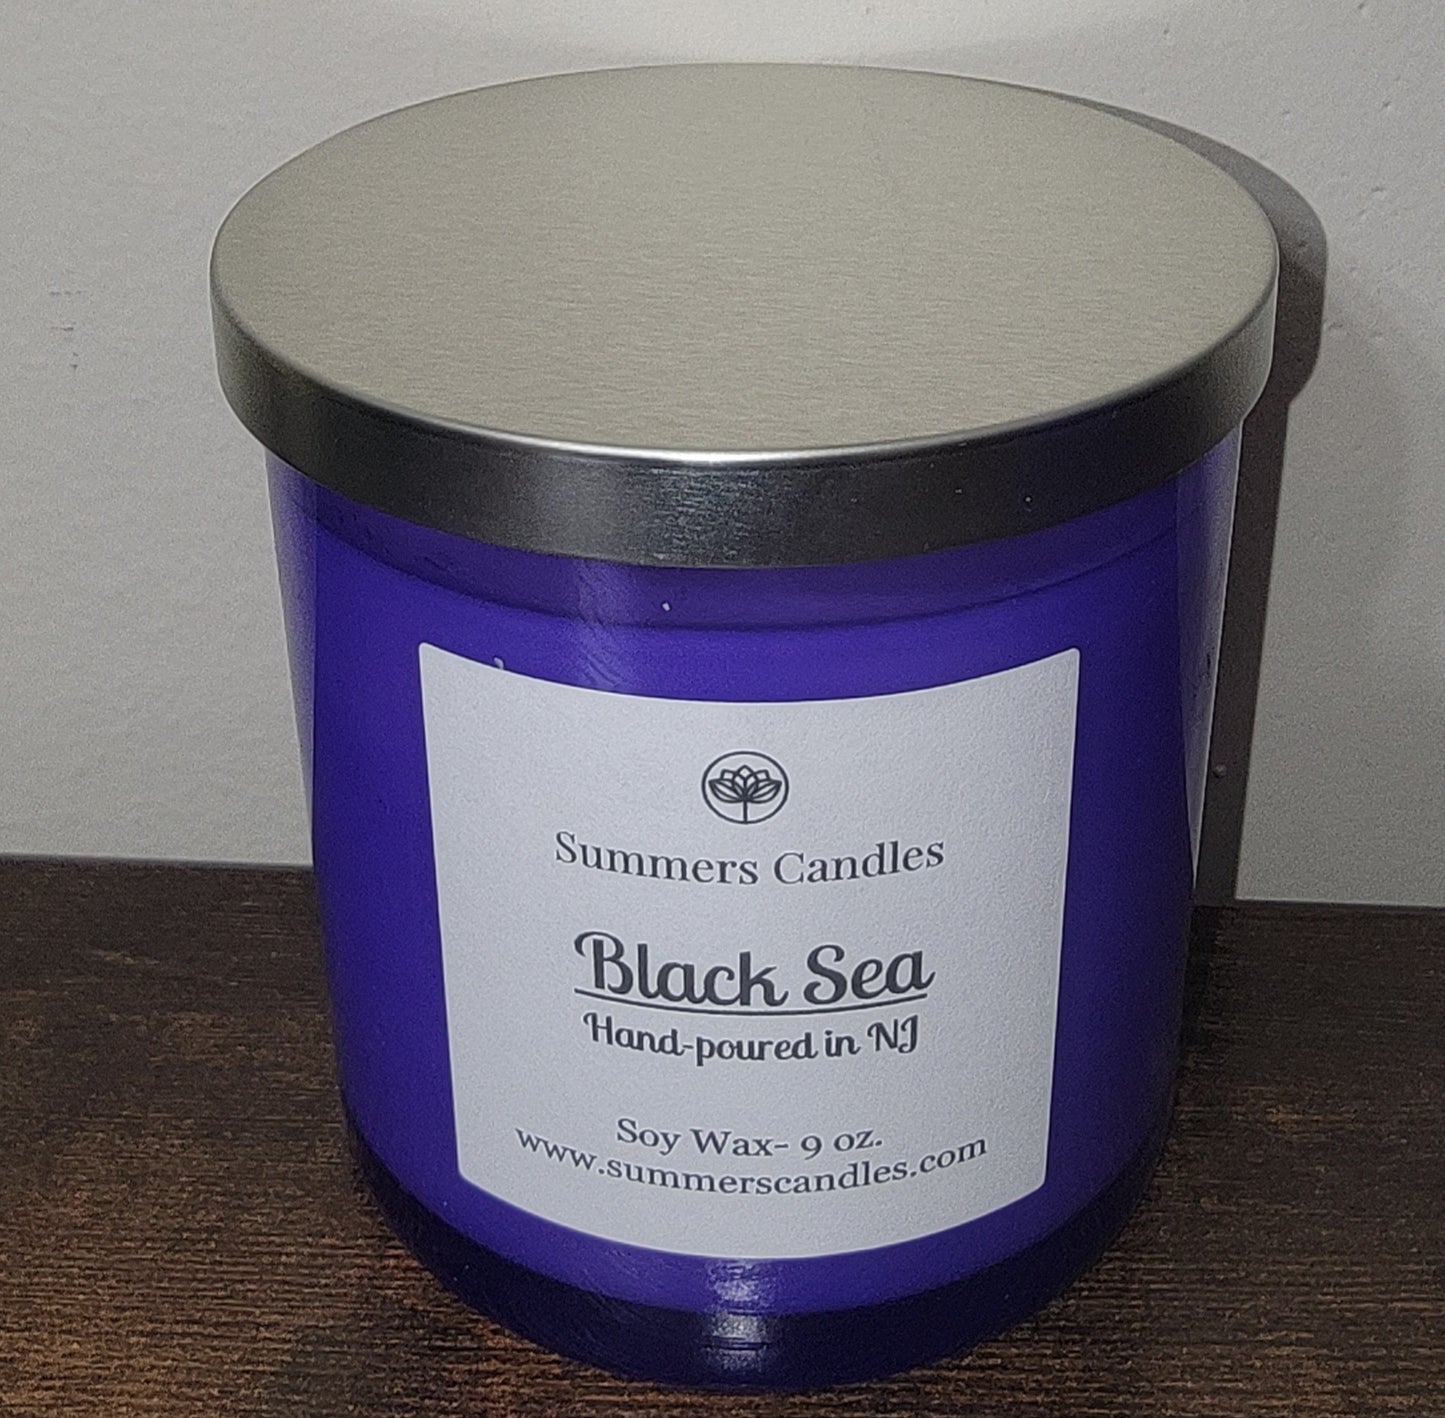 Black Sea Candles  - Summers Candles 